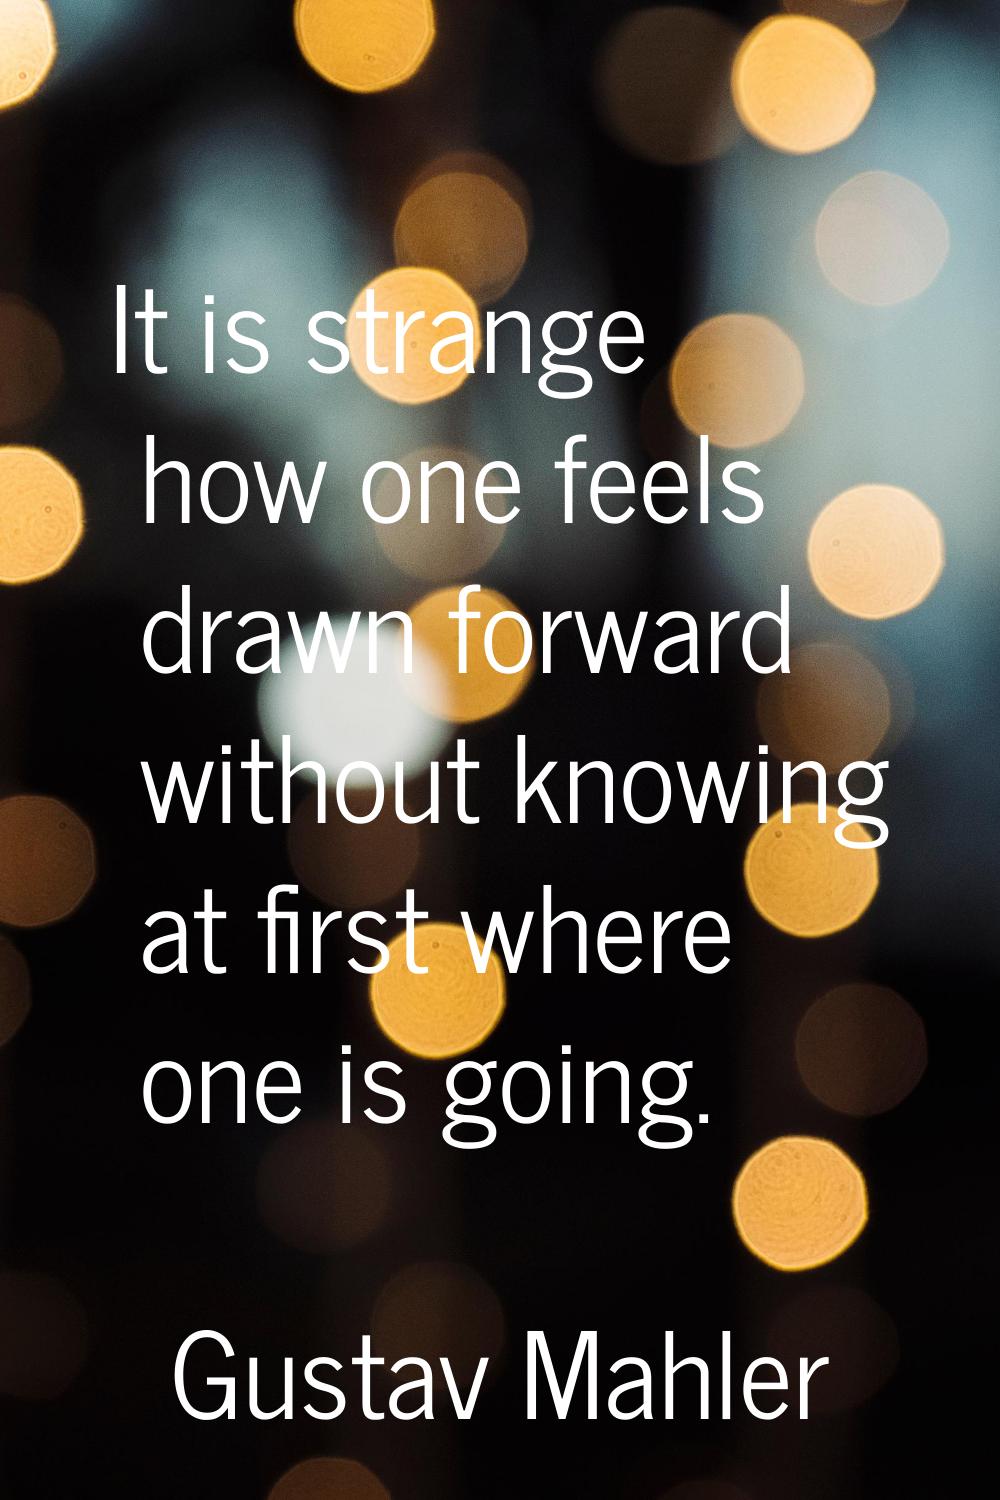 It is strange how one feels drawn forward without knowing at first where one is going.